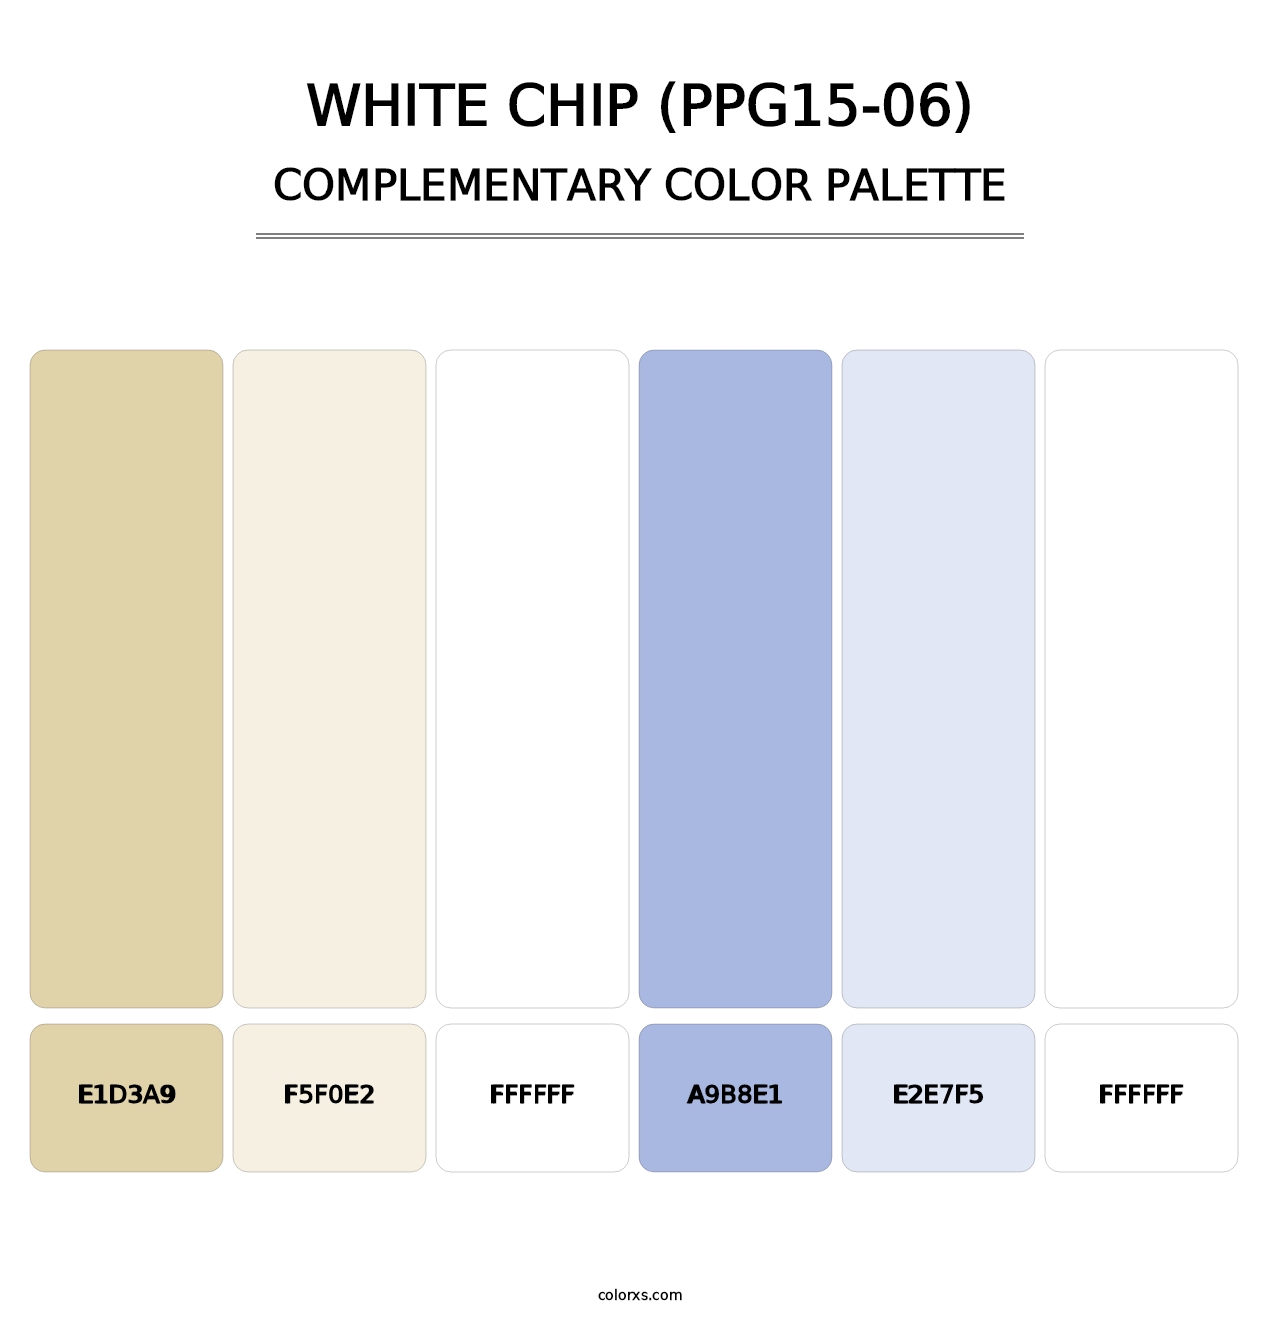 White Chip (PPG15-06) - Complementary Color Palette